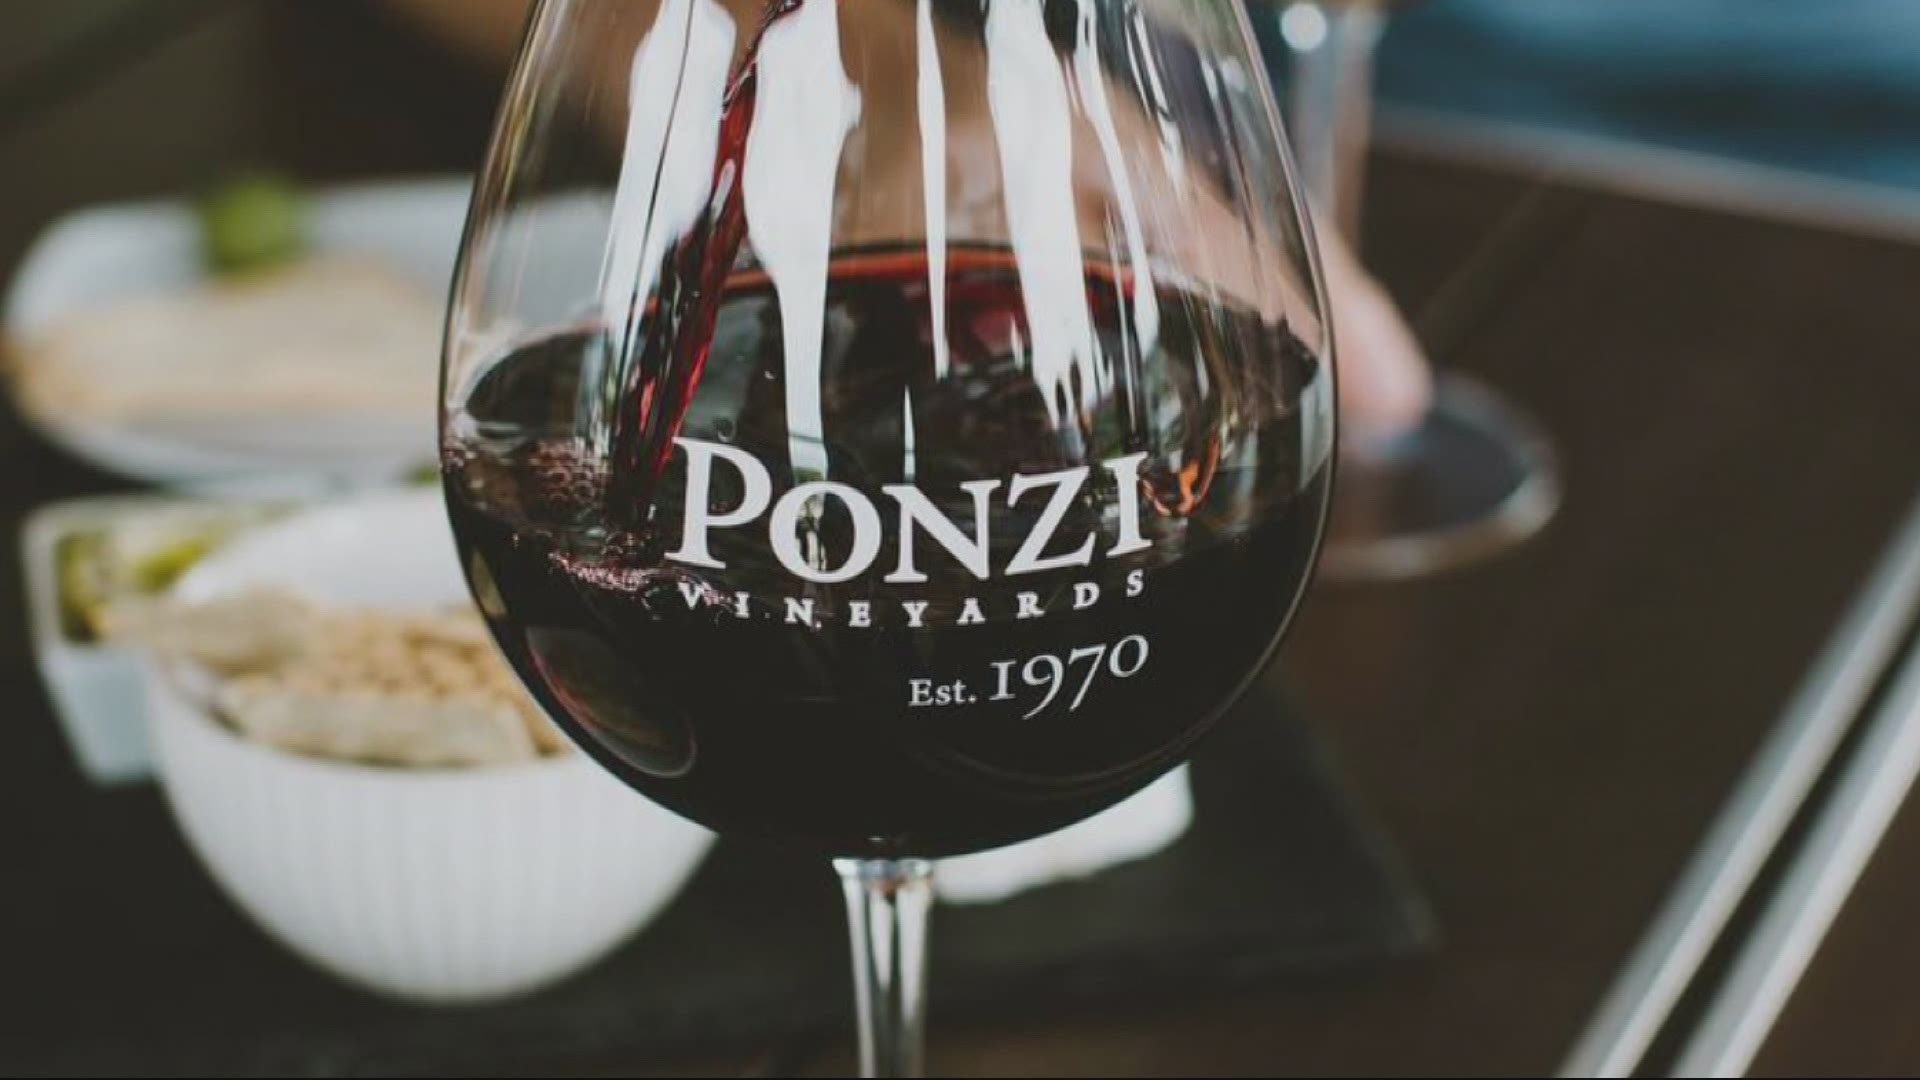 For more than 50 years, Ponzi Vineyards has helped bring Willamette Valley pinot noir into the global spotlight. Now it's being sold.